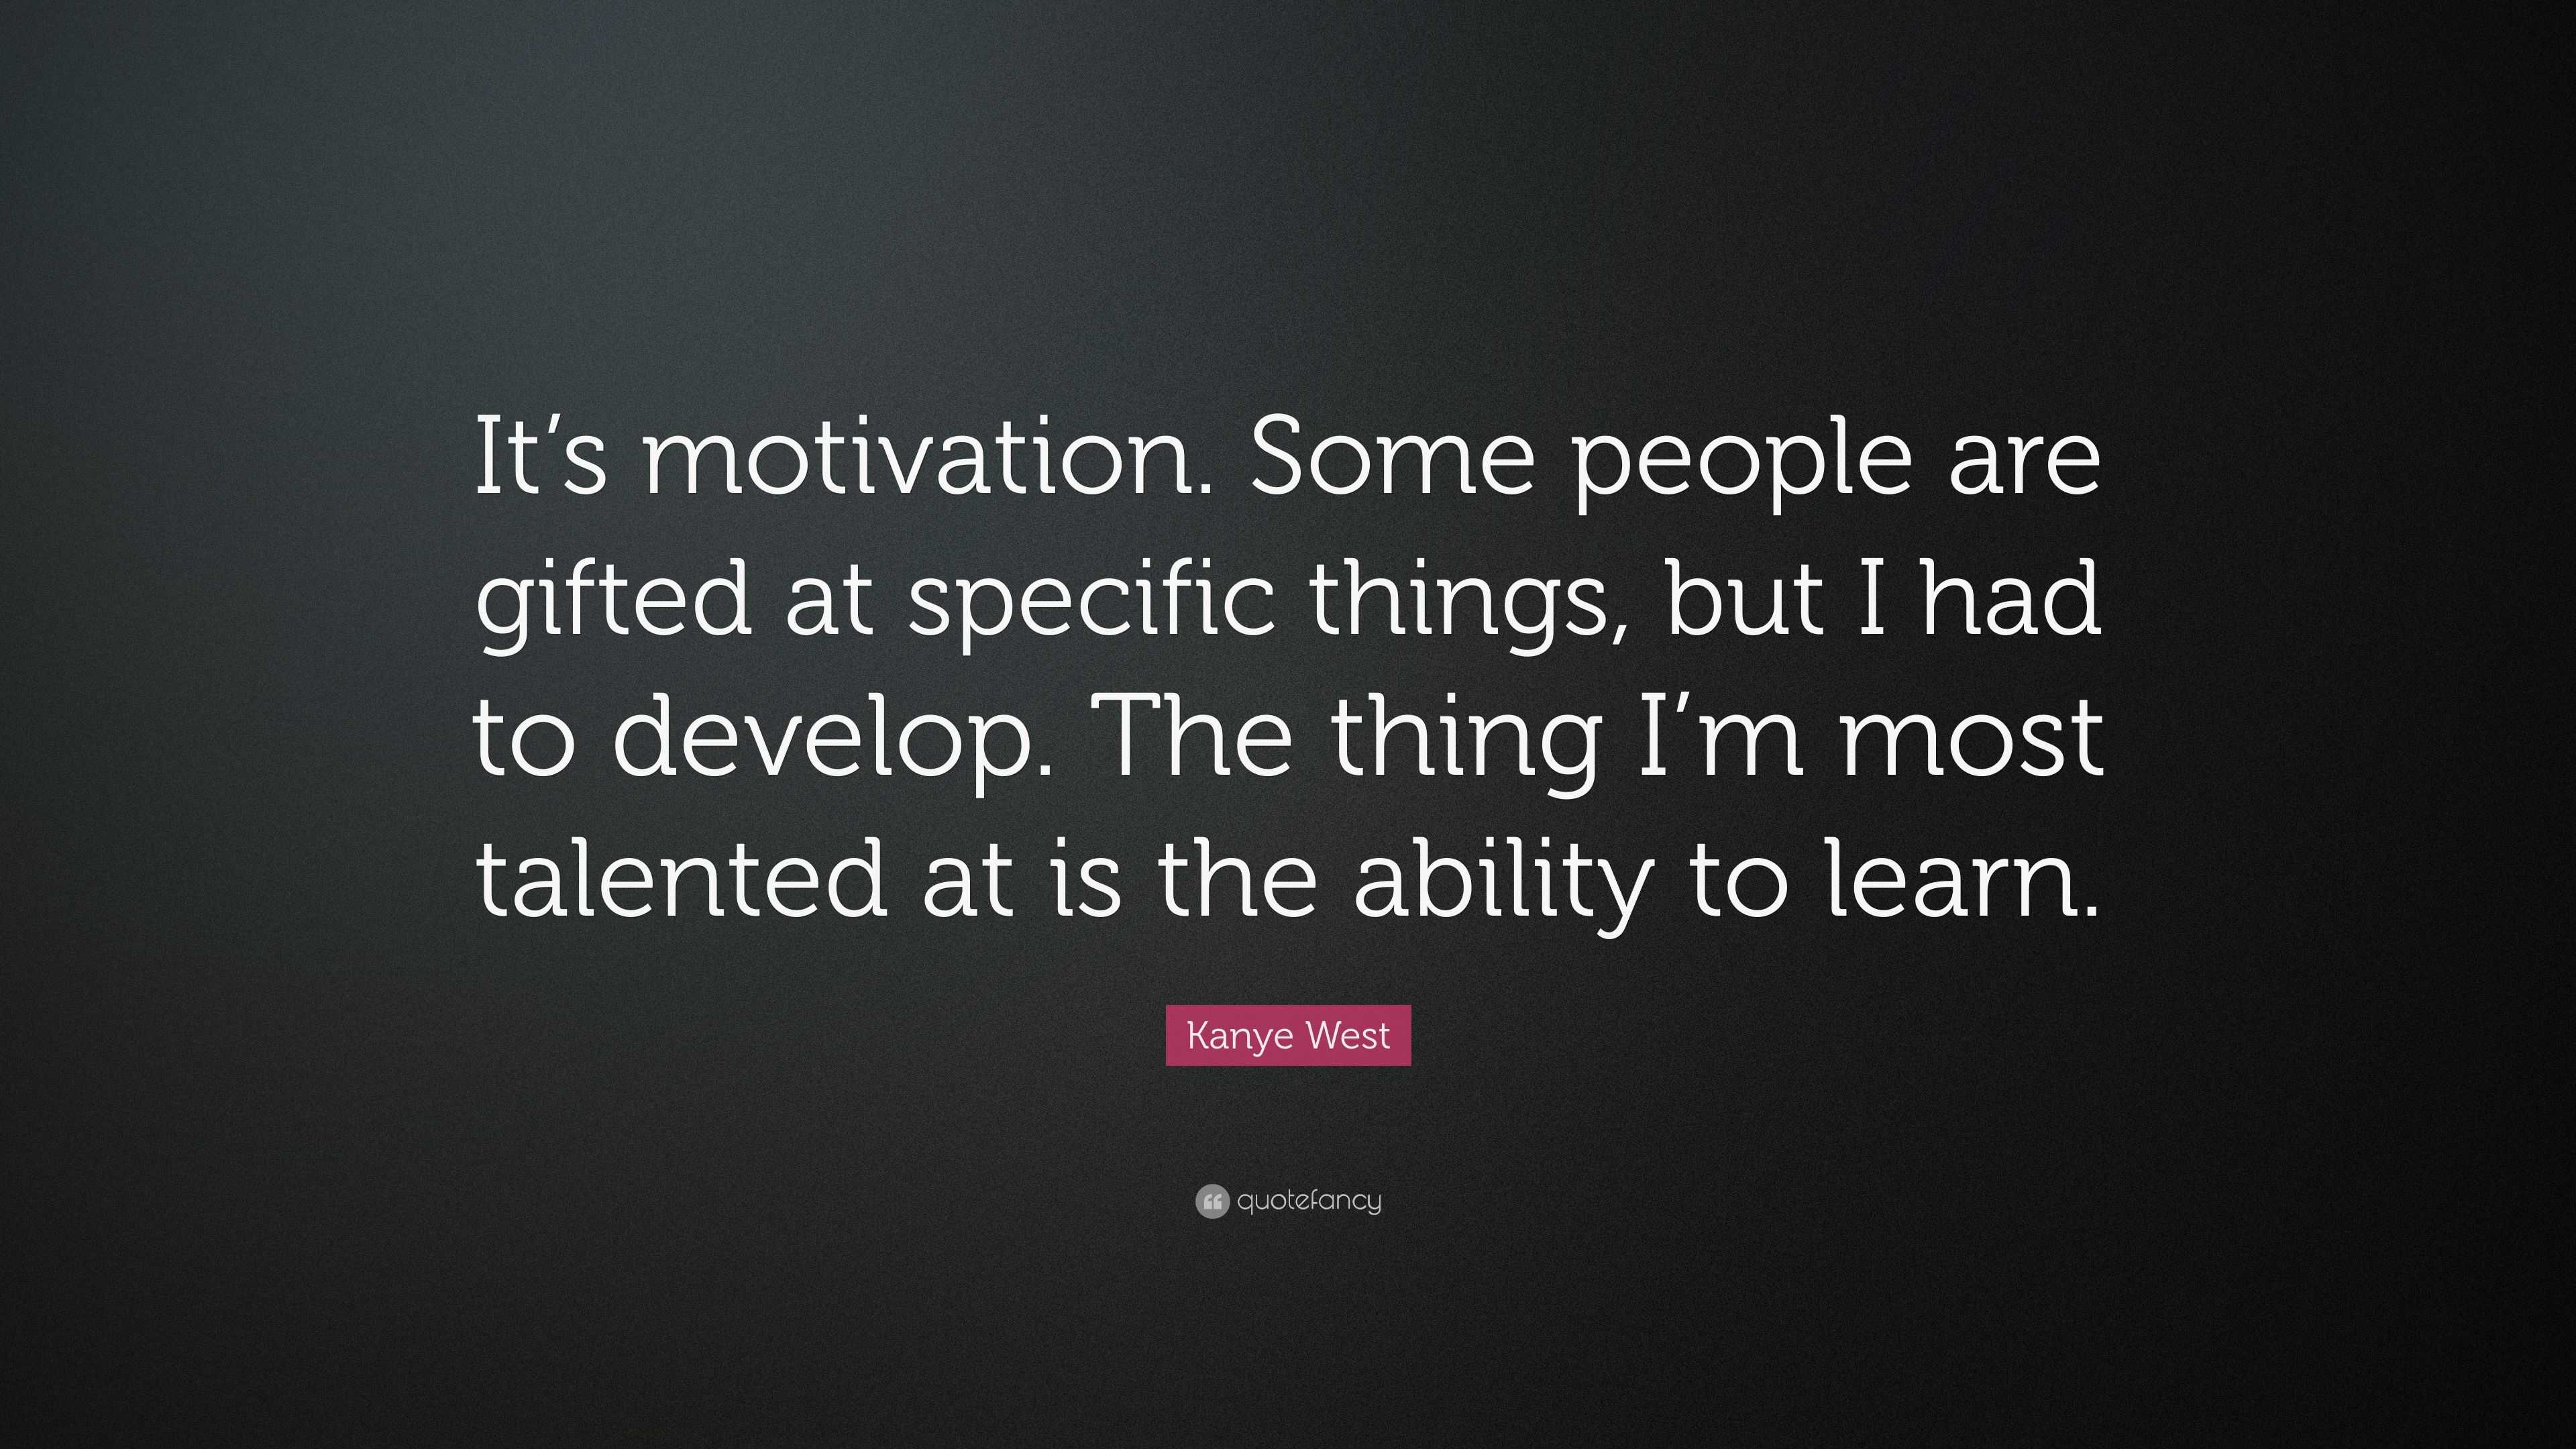 Kanye West Quote: “It’s motivation. Some people are gifted at specific ...